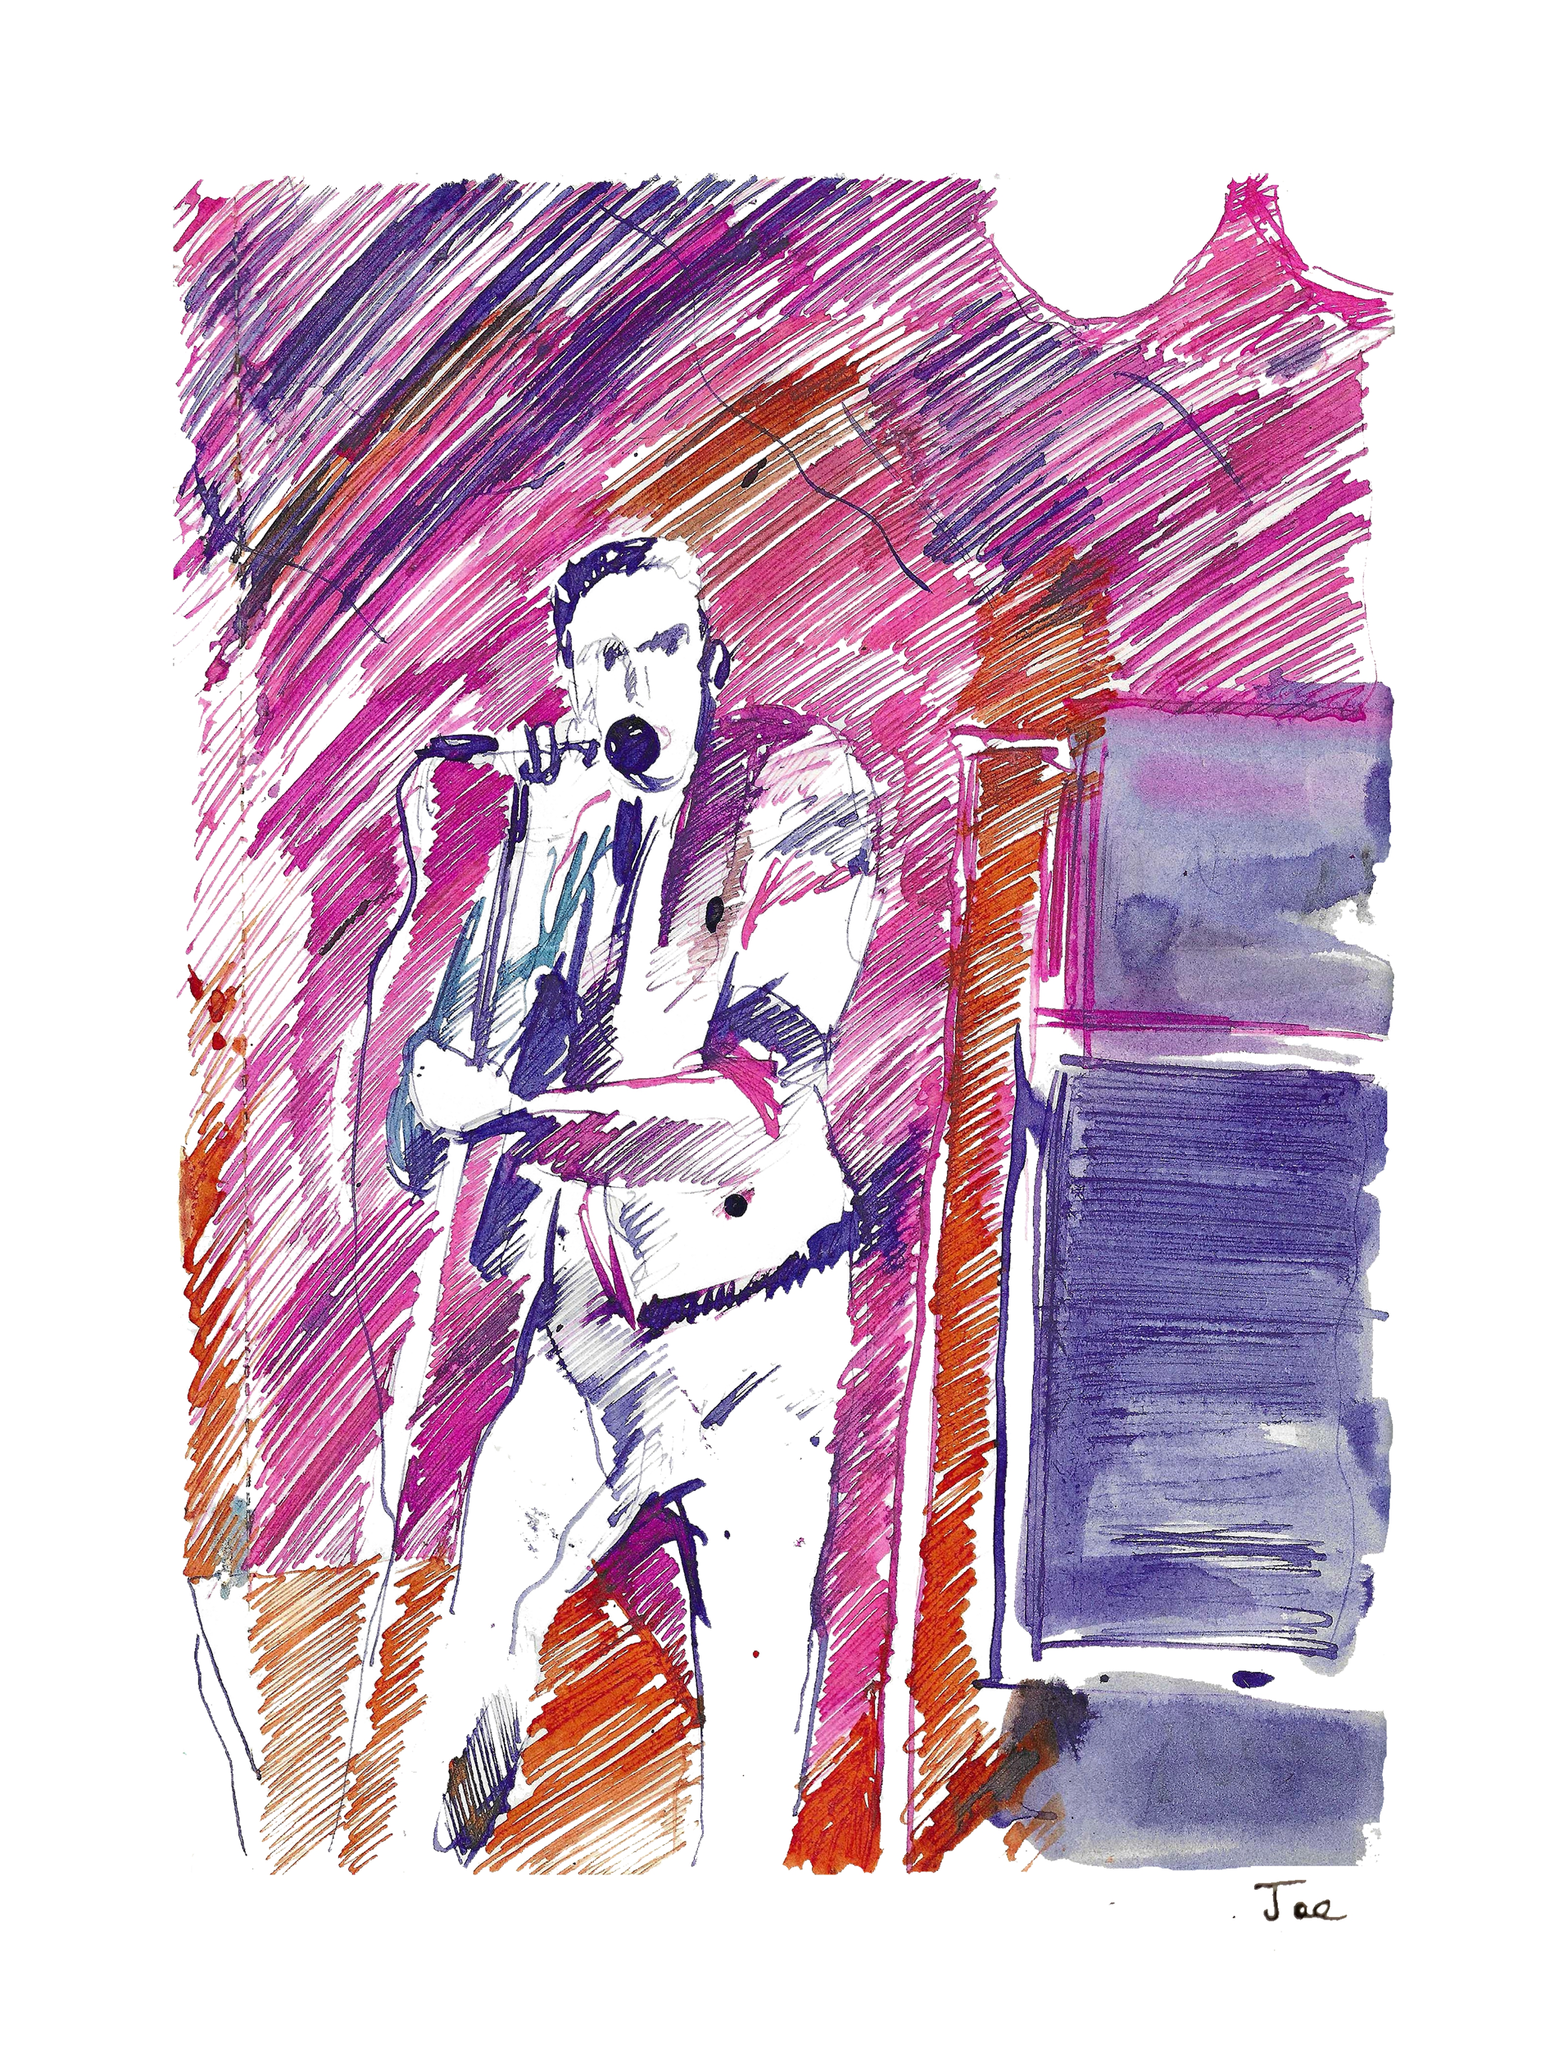 Mr Strummer (the voice that shook through generations) - Limited Edition Print (1 of 79)